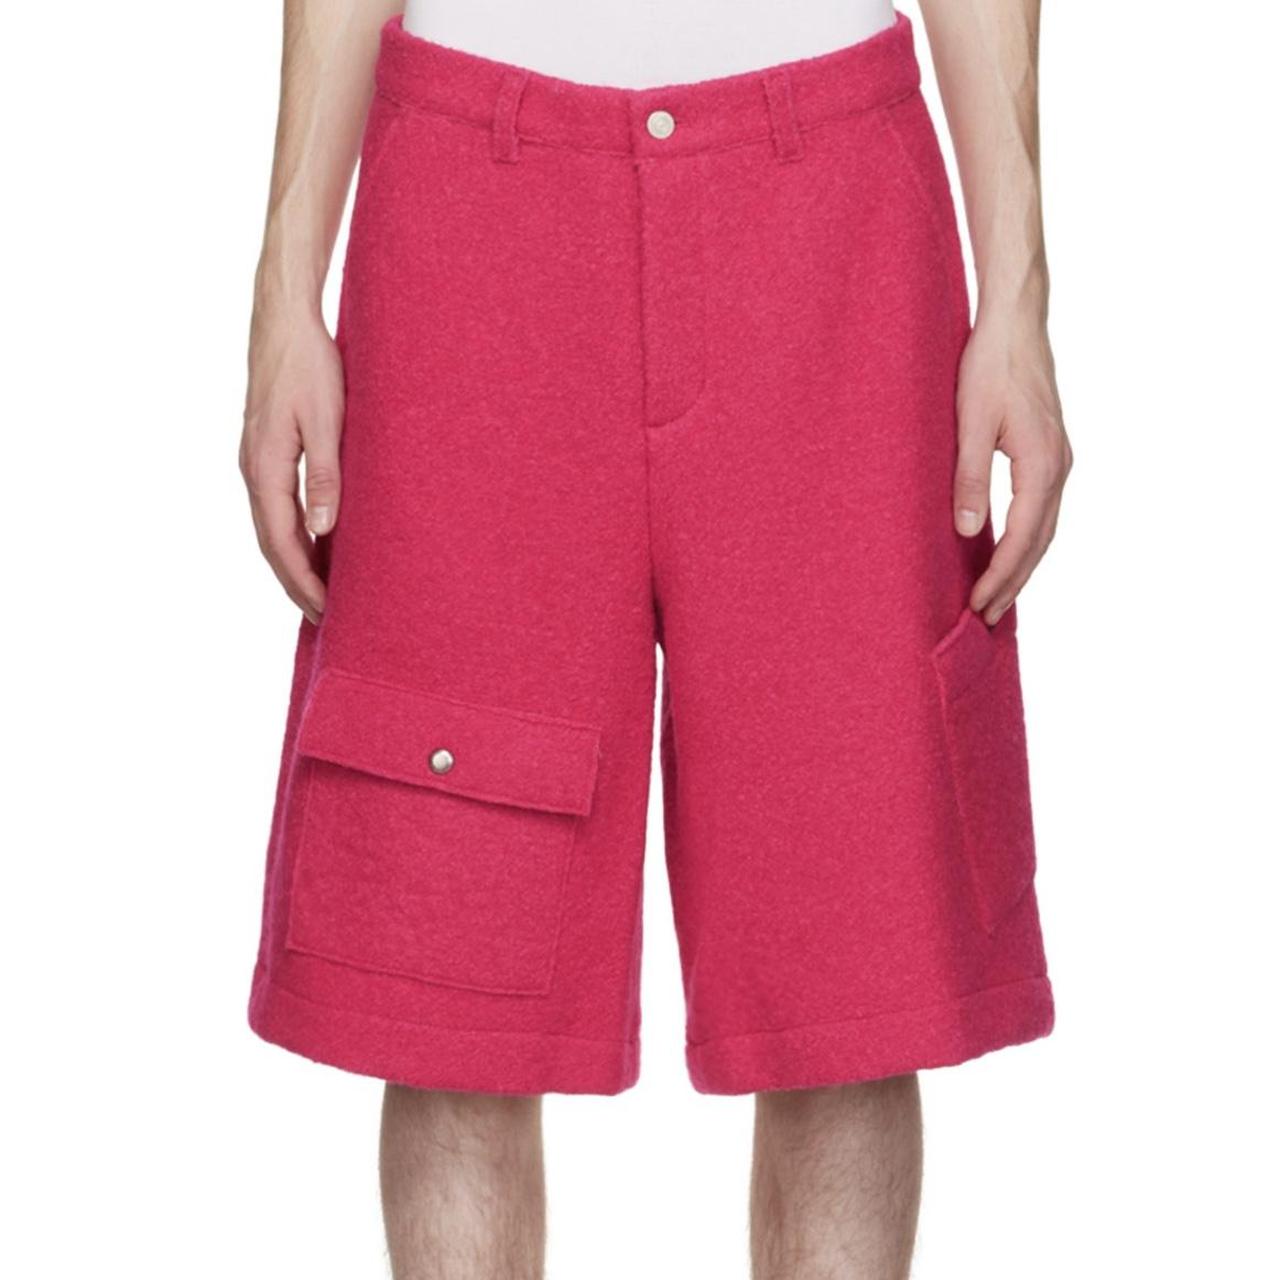 Andersson bell wool cargo shorts in pink. NEVER... - Depop